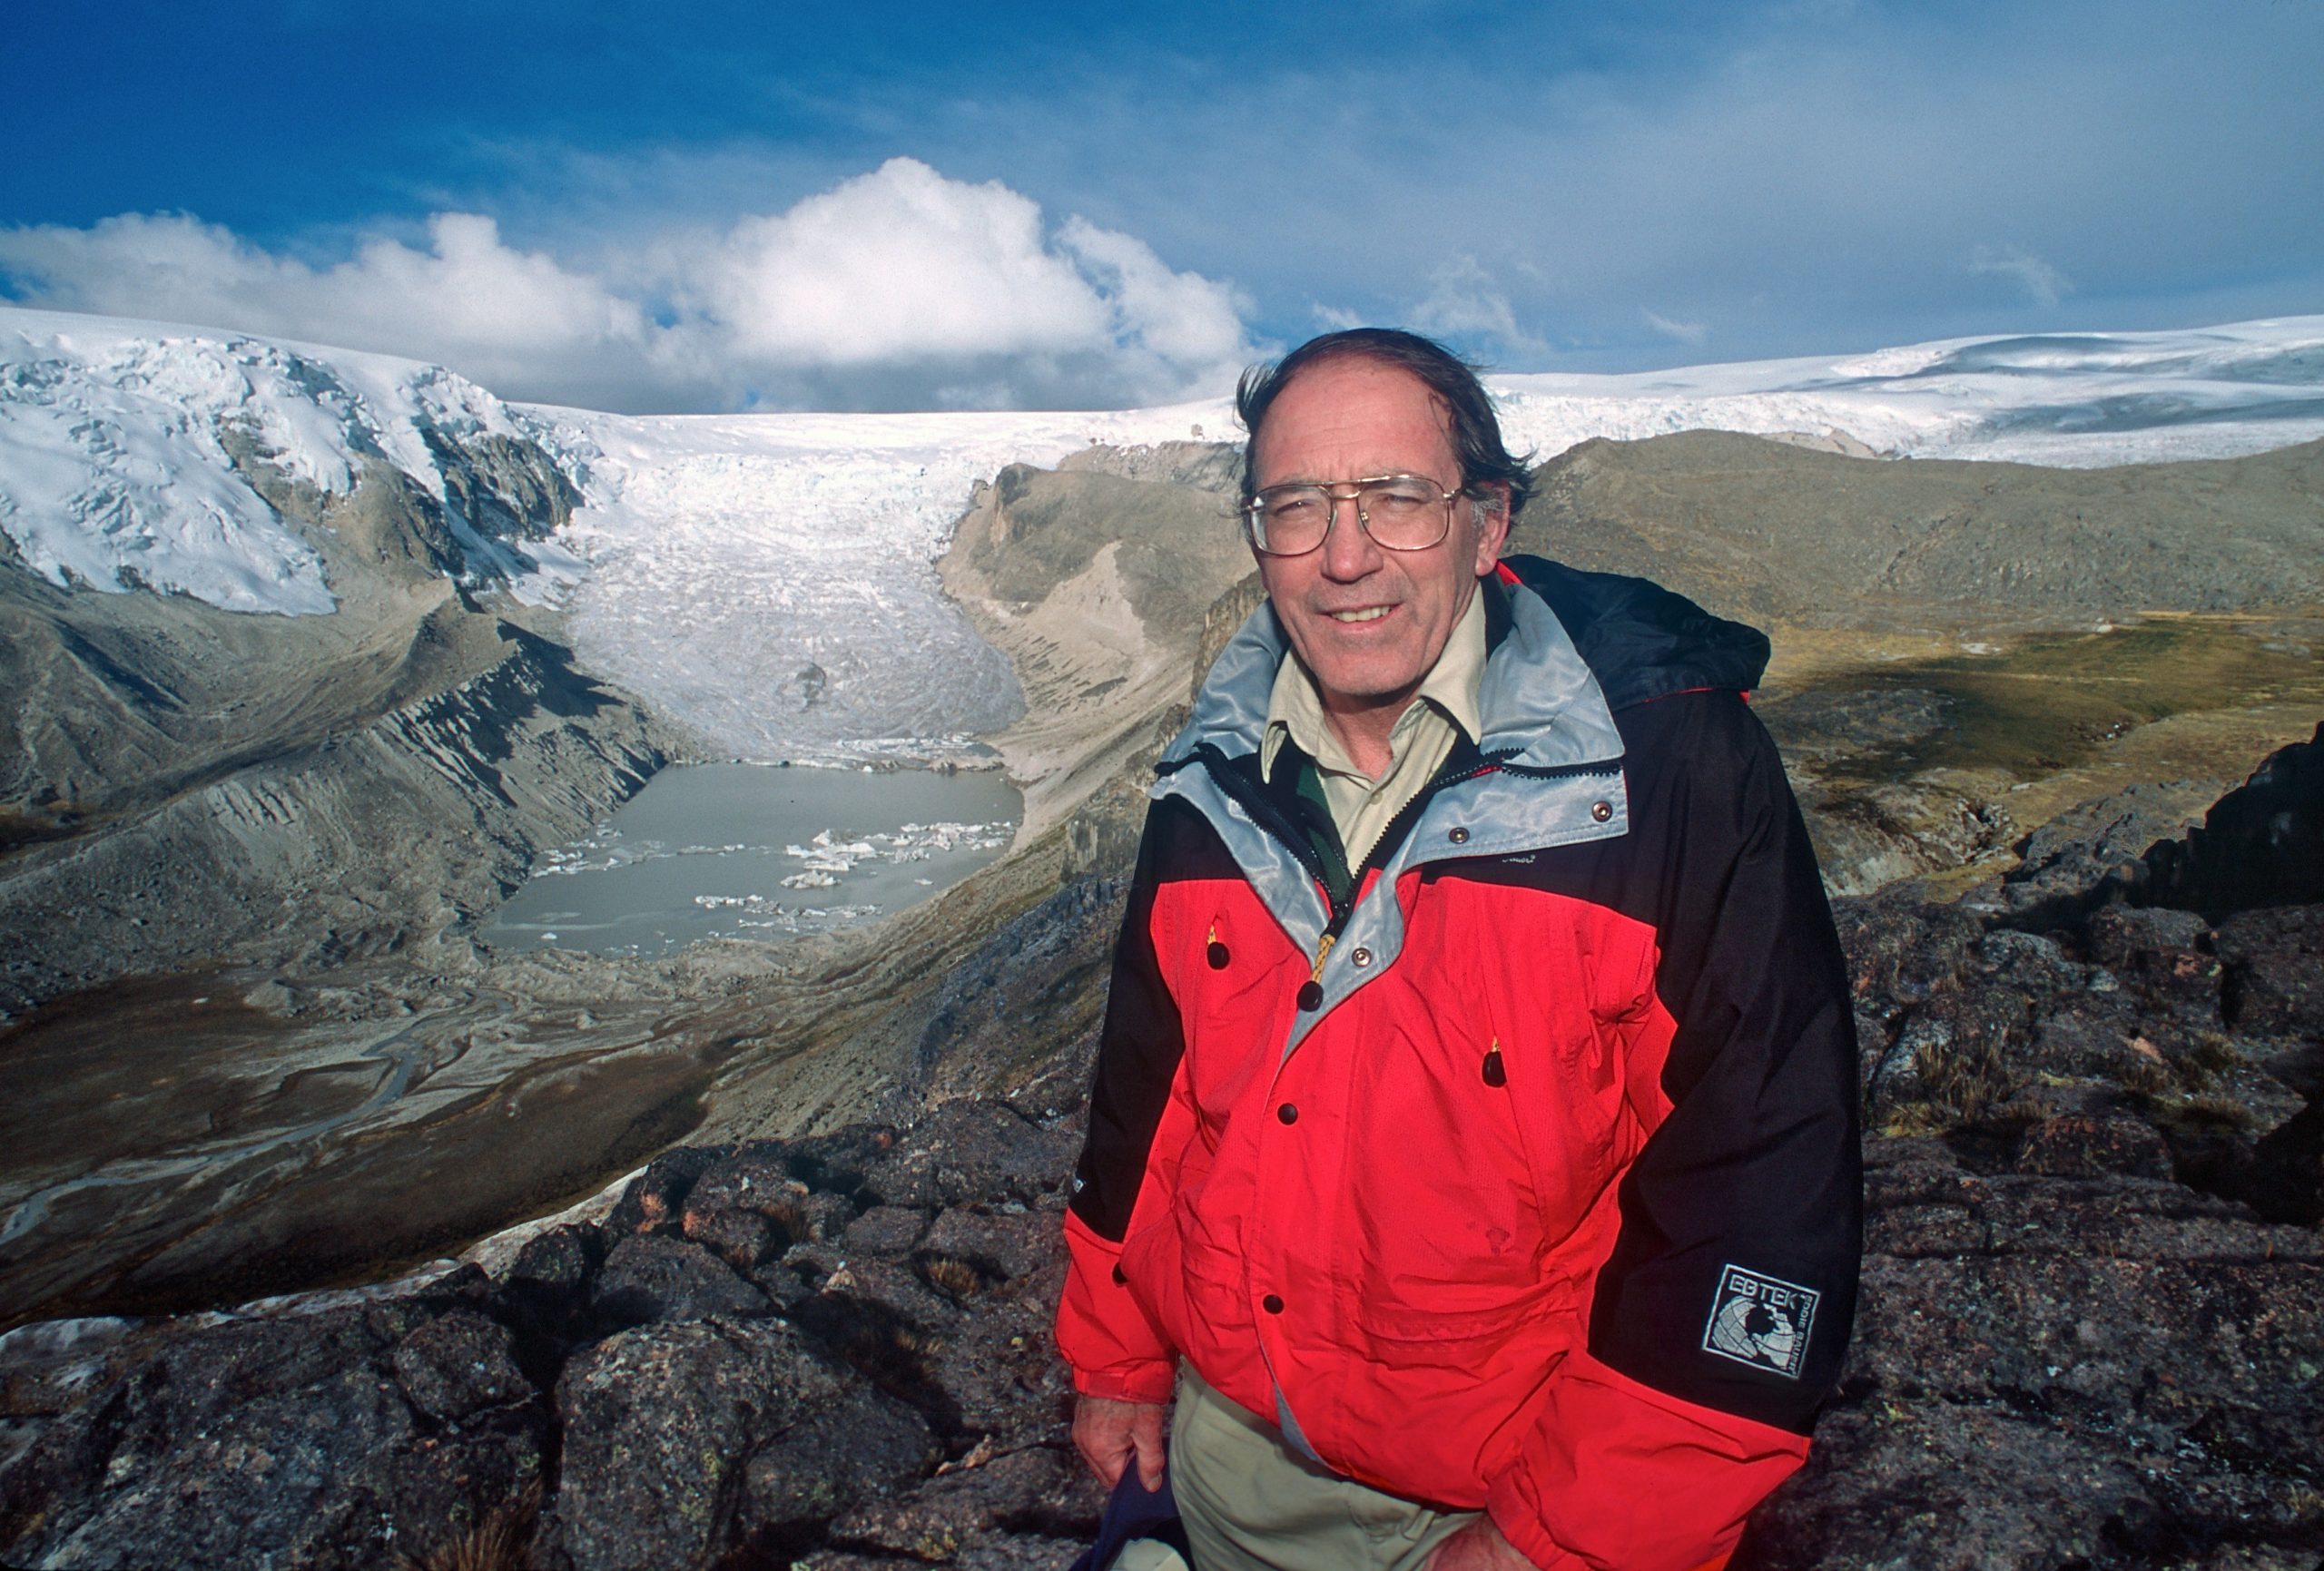 Ohio State University researcher Lonnie Thompson at Qori Kalis glacier in Peru. His research team studies polar ice and tropical glacial ice for clues to climate-related events as long as 25,000 years ago.